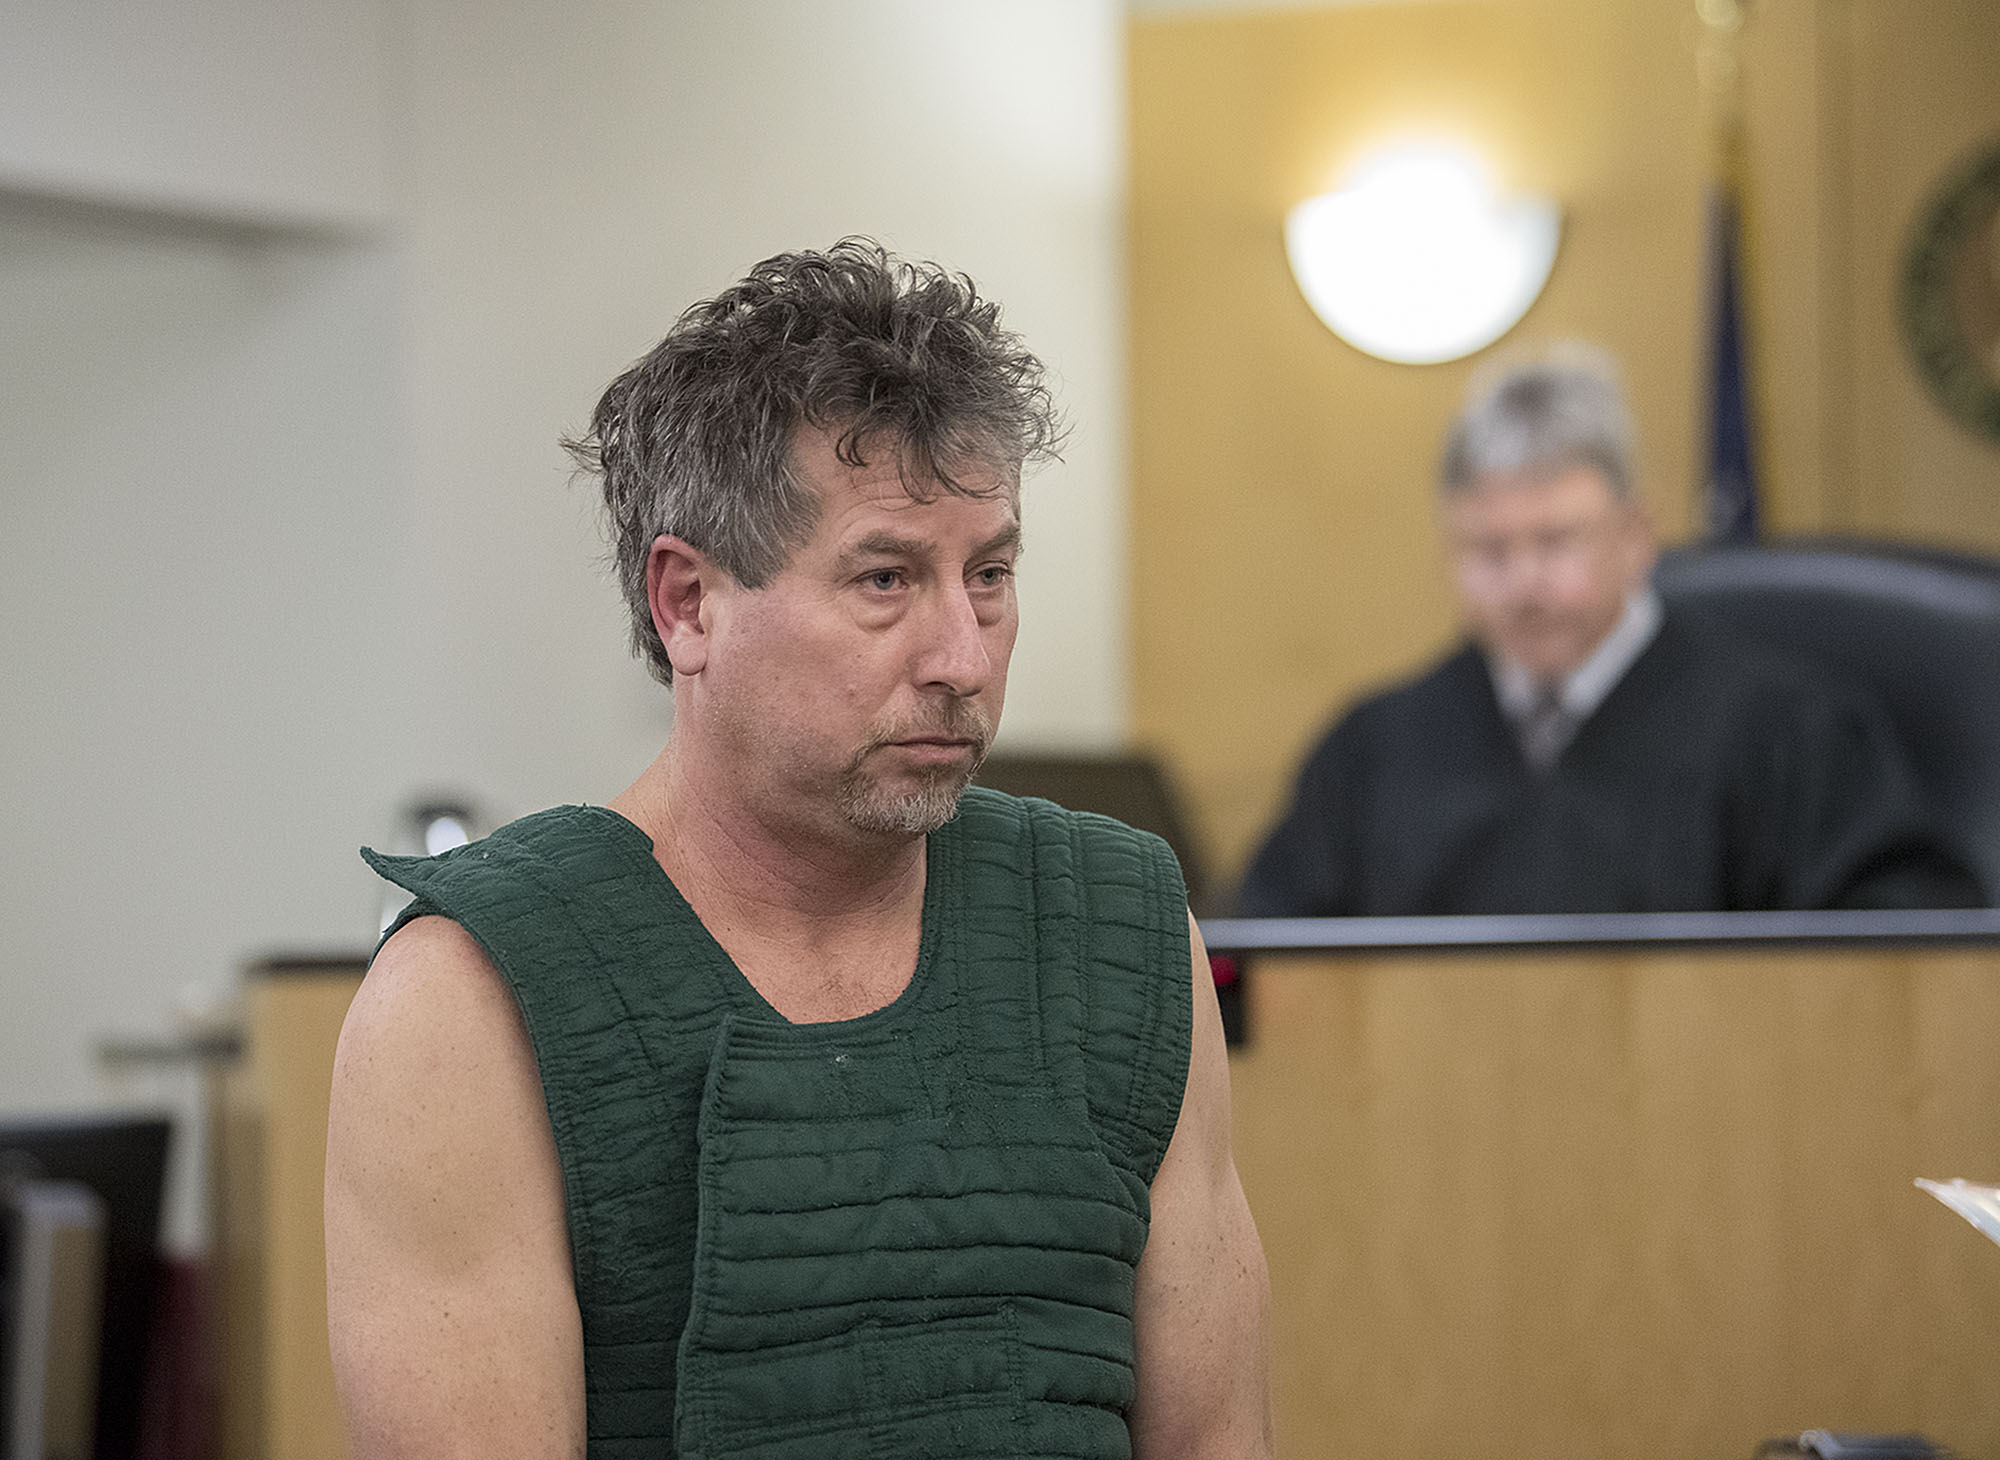 TJ Patrick Ferres, who was arrested on suspicion of second-degree murder, makes a first appearance in Clark County Superior Court on Jan. 23. The mother of the Vancouver man Ferres is accused of fatally shooting has filed a personal injury and wrongful death suit against Ferres in Clark County Superior Court.